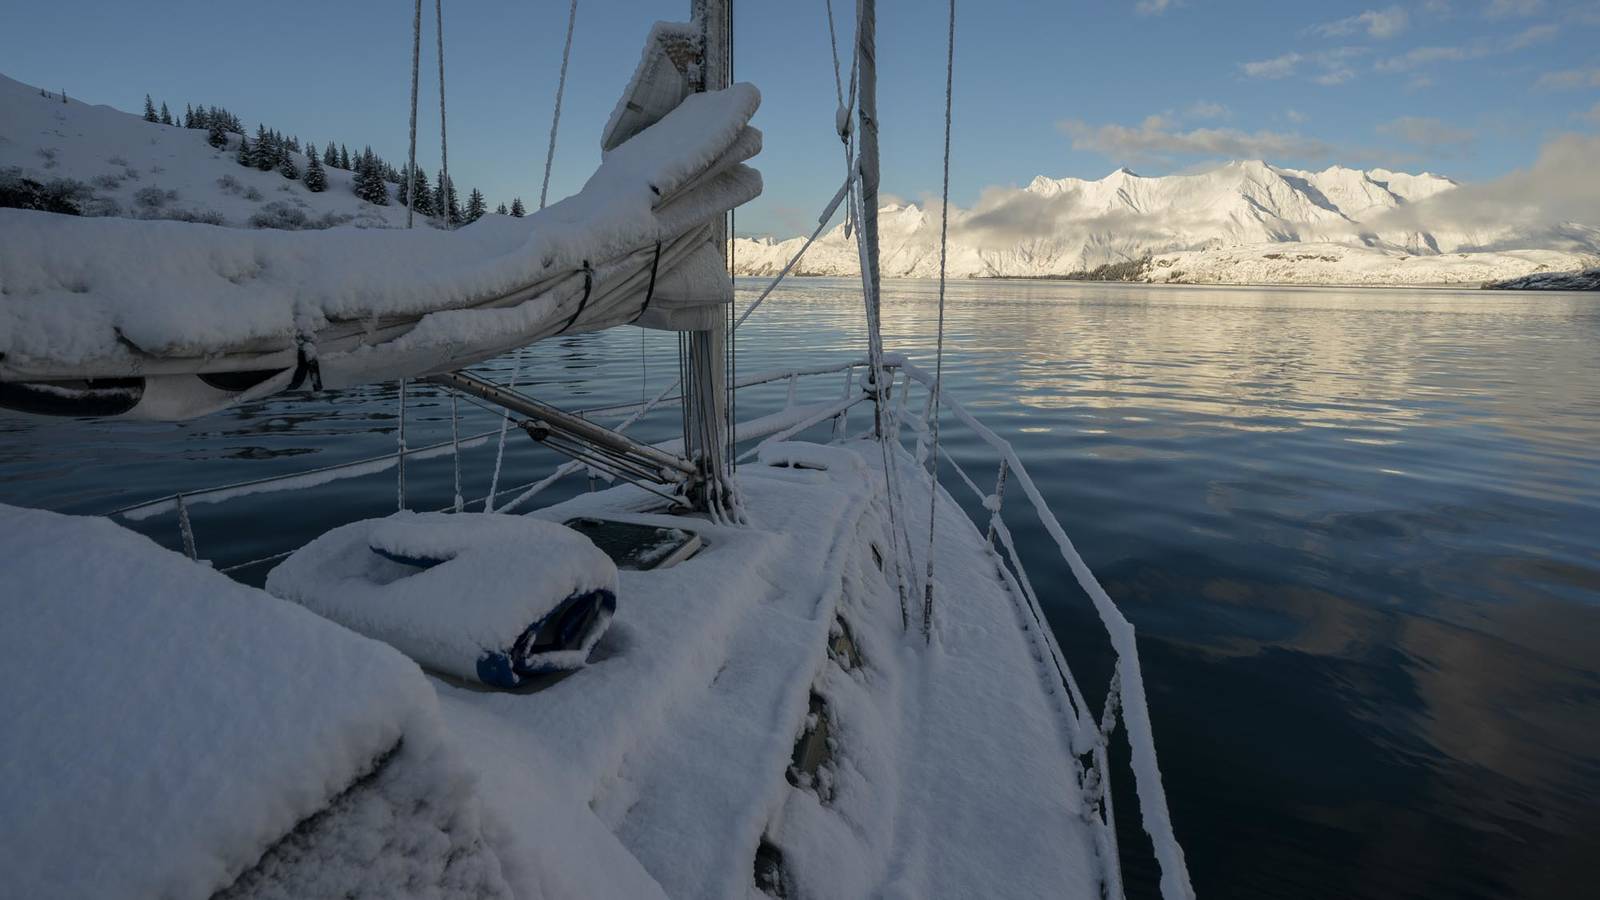 <p>Waking to a fresh dusting of snow on the Madrona. Finding the boat in the same place it had been anchored the night before was a constant relief to the five people on board. Swells from the Gulf of Alaska have been known to surge into the fjords, lifting boat anchors off the ocean floor and causing boats to drift.</p>